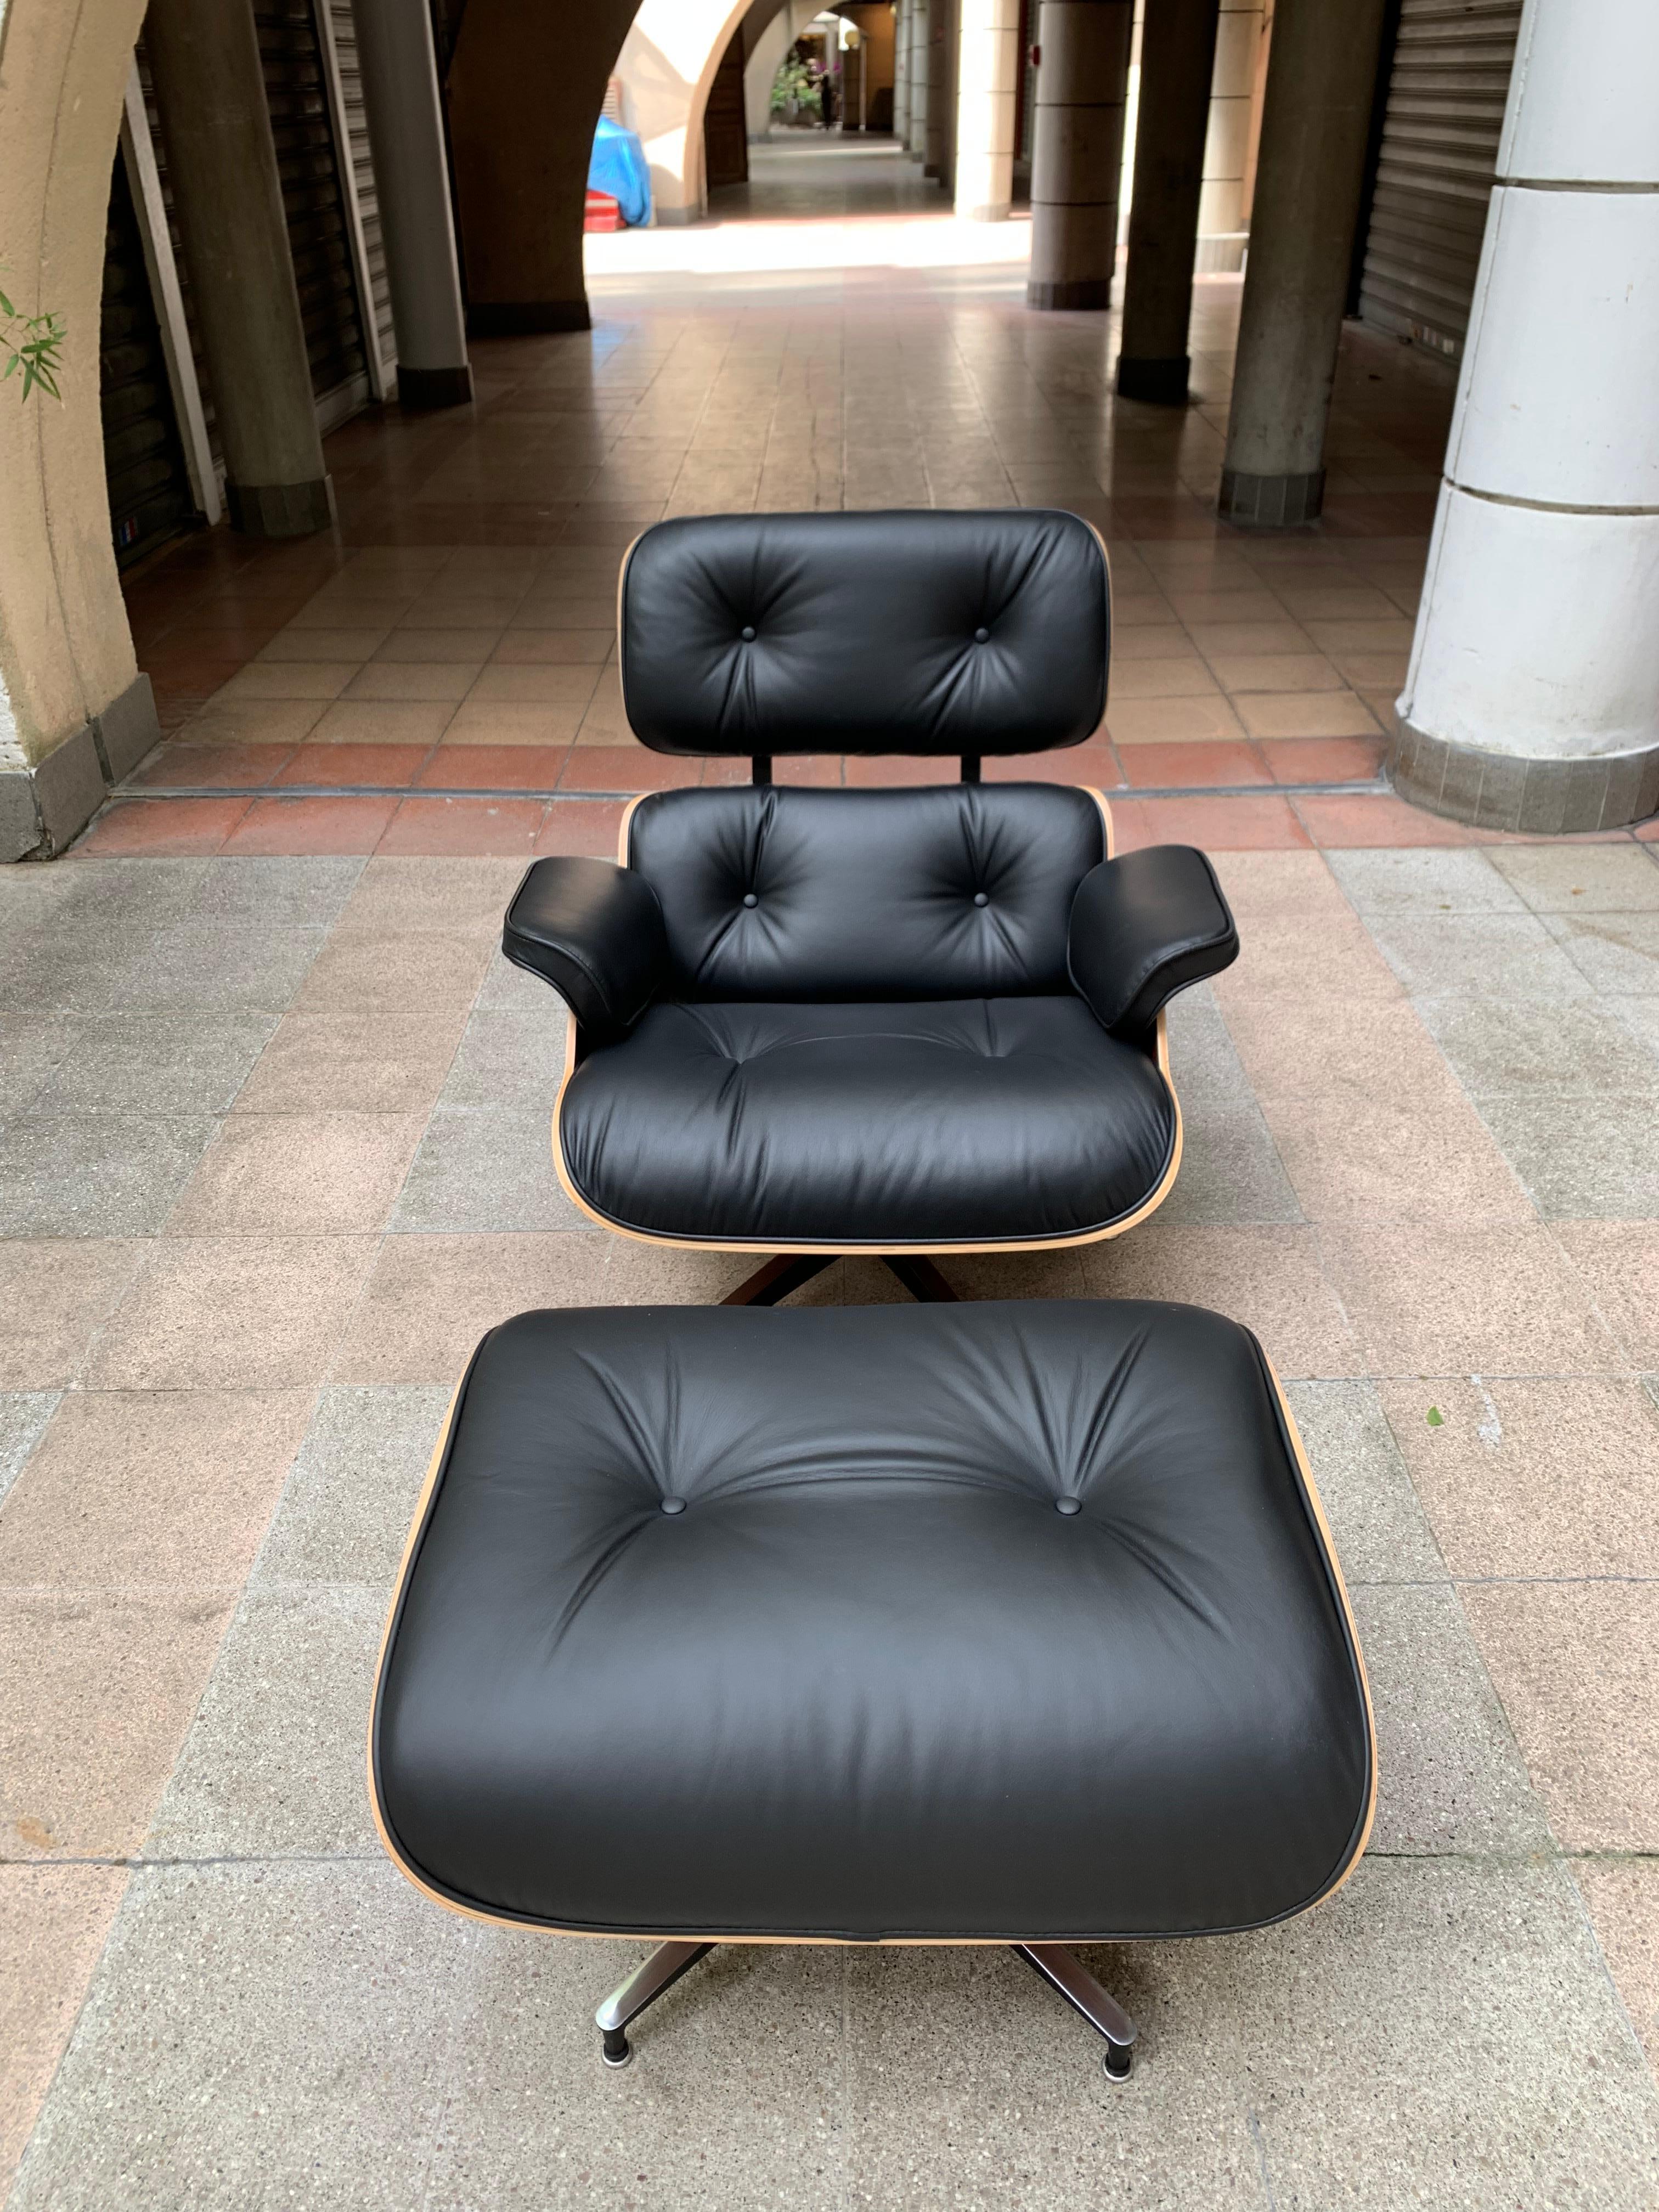 Charles Eames, lounge chair and its black leather and rosewood ottoman, circa 2011

Edition Herman Miller, USA, 2011
Black leather and rosewood 

Dimensions:
Chair H 82 x W 83 x L 83
Ottoman 44 x 54 x 66

Perfect condition. 

4900€.